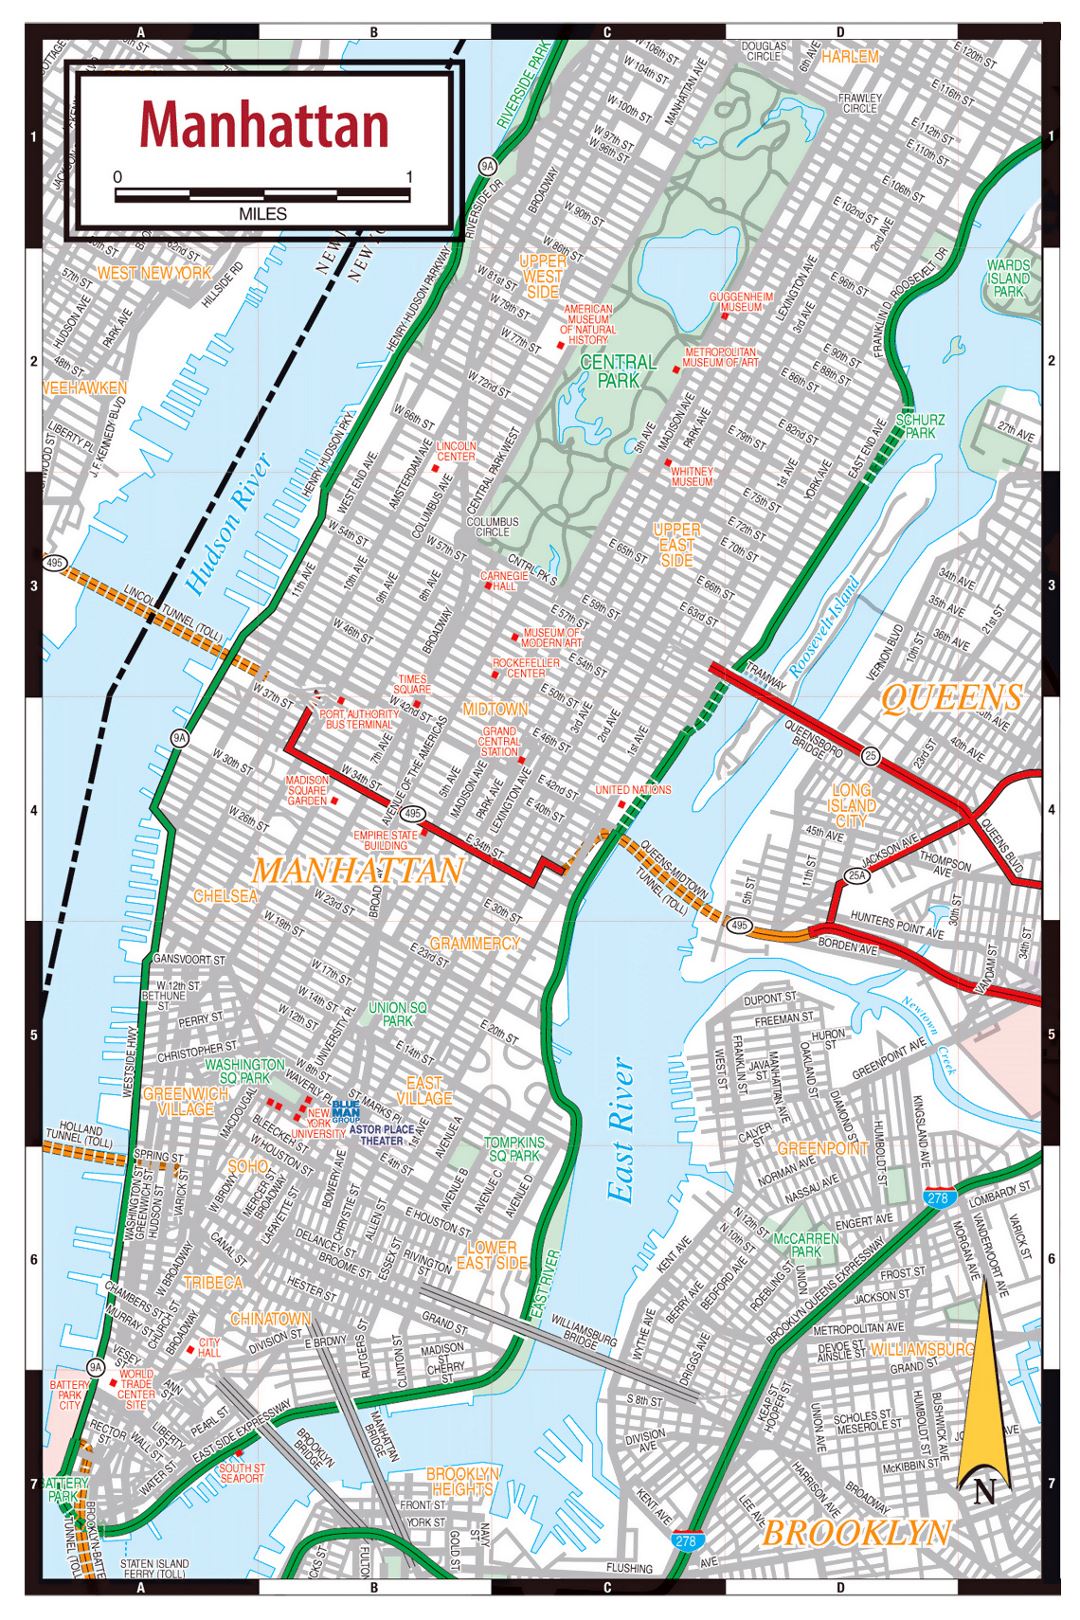 Manhattan streets map | New York | New York state | USA | Maps of the ...